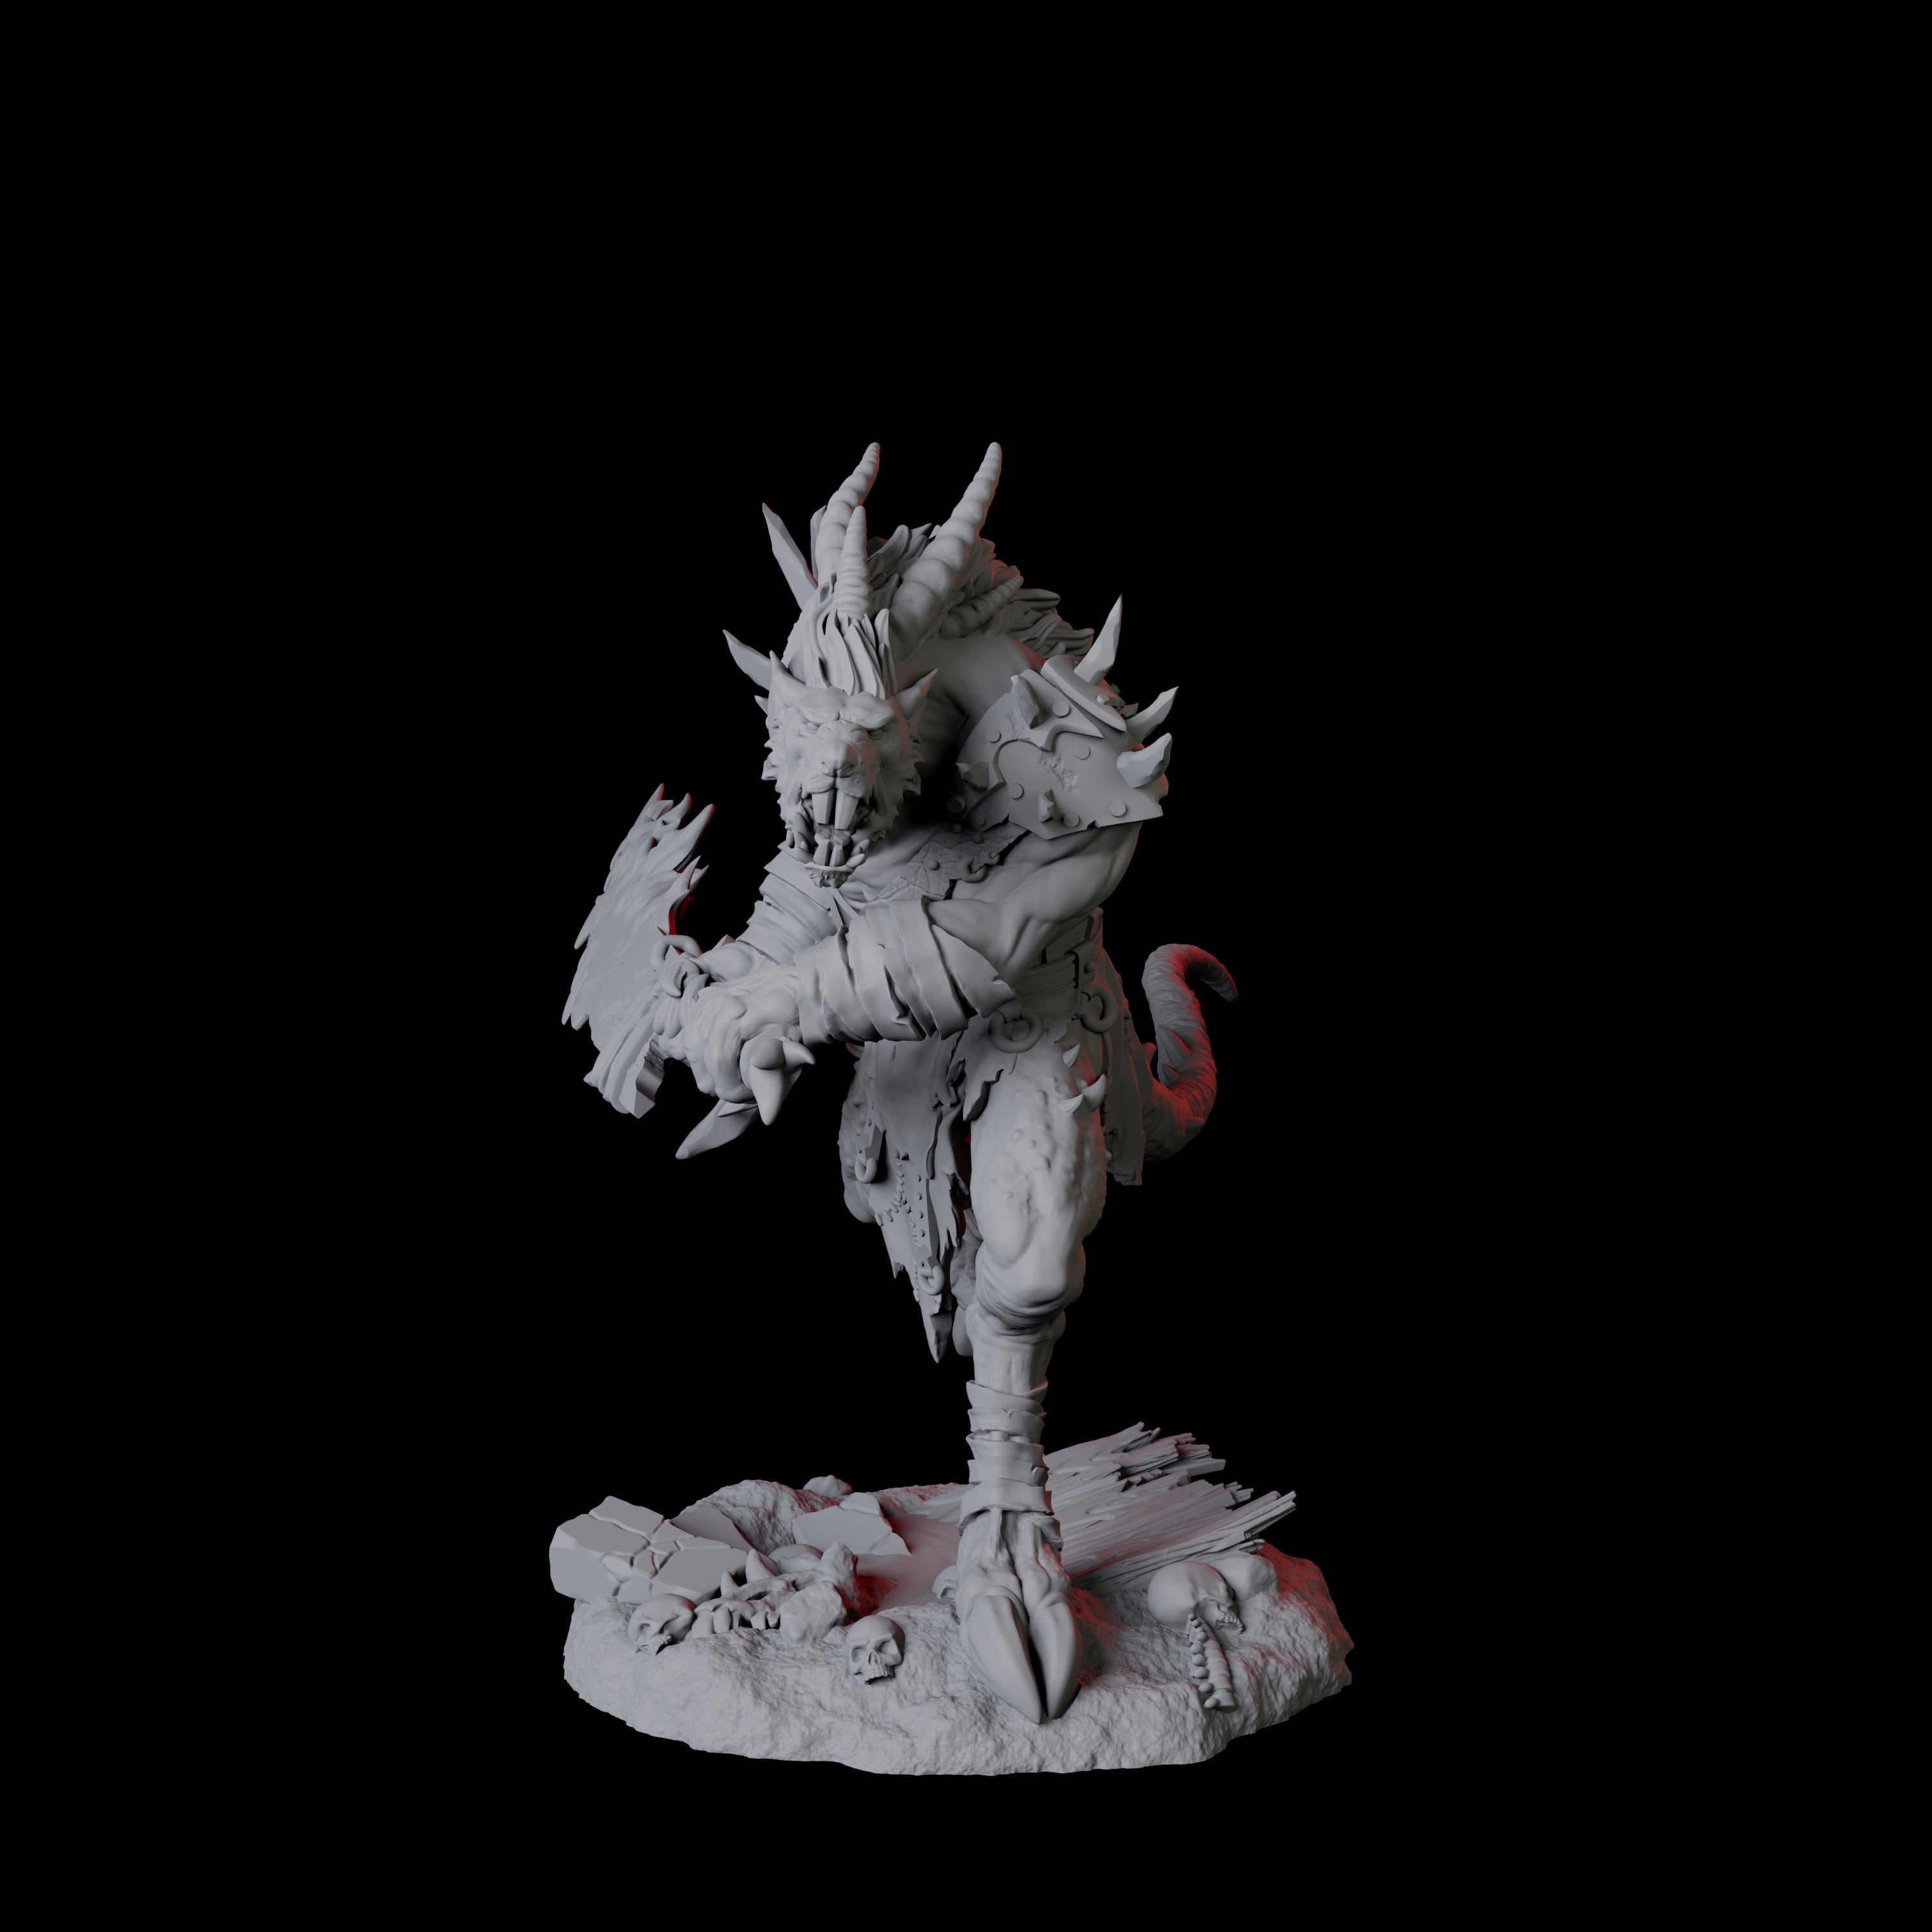 Blackfang Mutant Ratfolk B Miniature for Dungeons and Dragons, Pathfinder or other TTRPGs